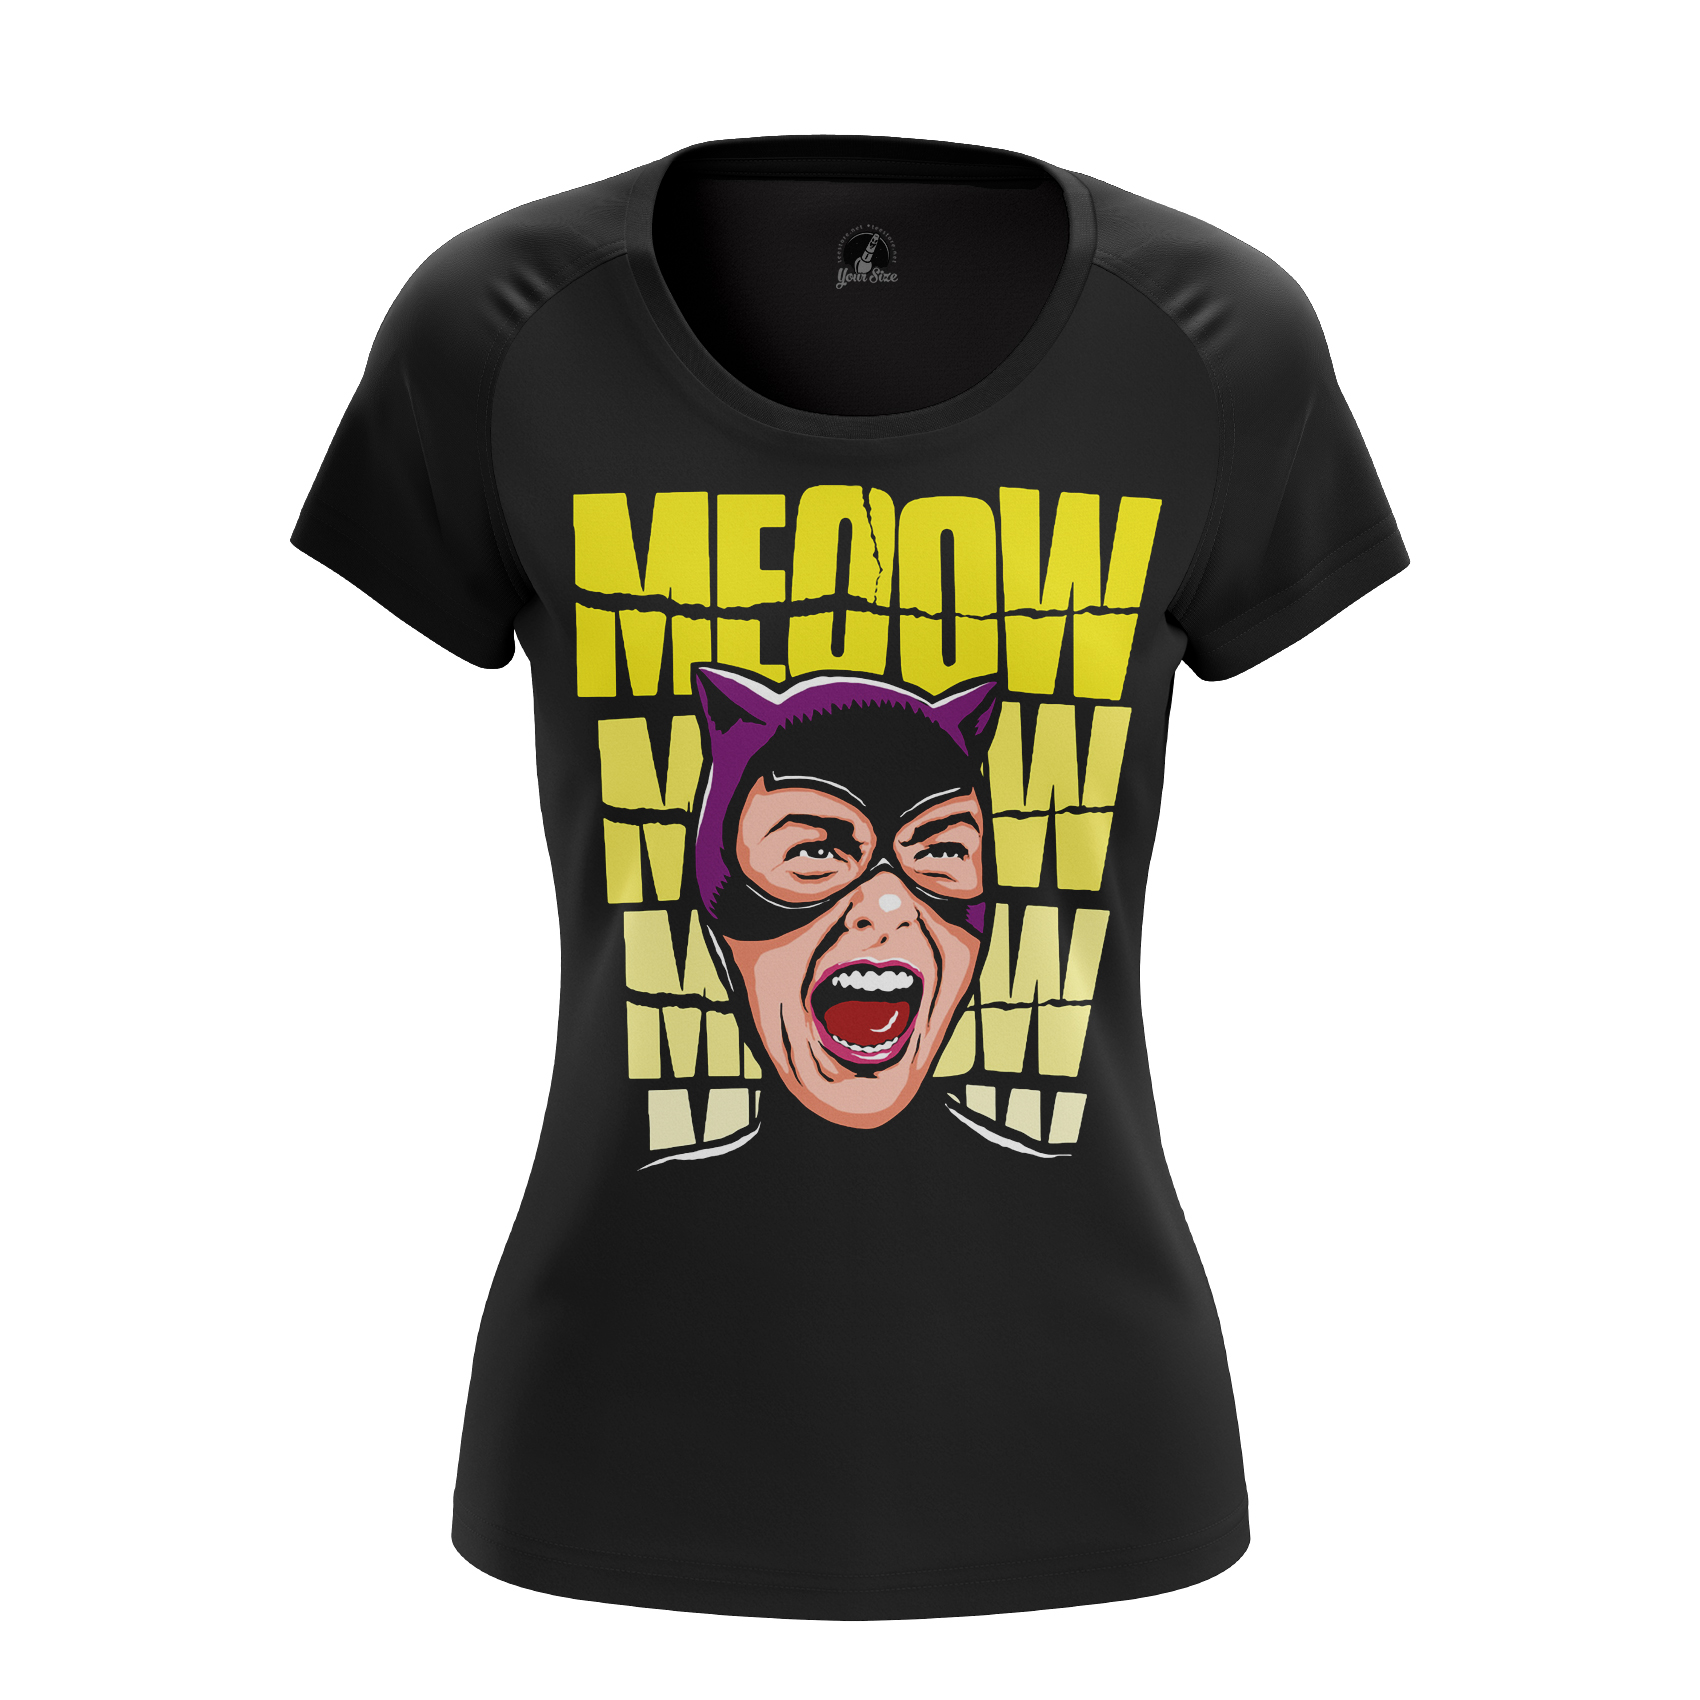 Women’s tank Meow Catwoman Vest Idolstore - Merchandise and Collectibles Merchandise, Toys and Collectibles